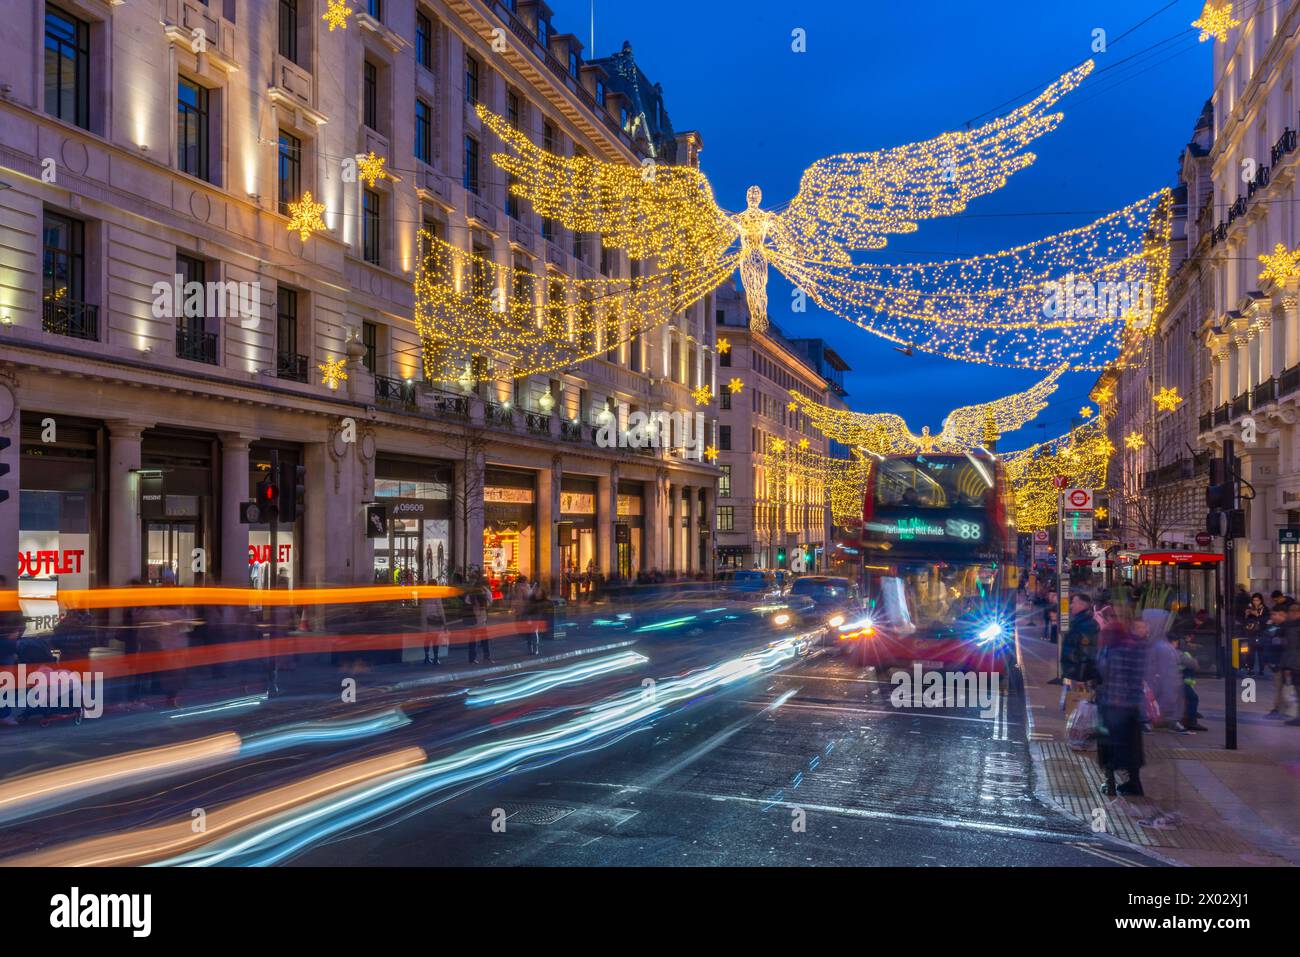 View of Regent Street shops and lights at Christmas, Westminster, London, England, United Kingdom, Europe Stock Photo